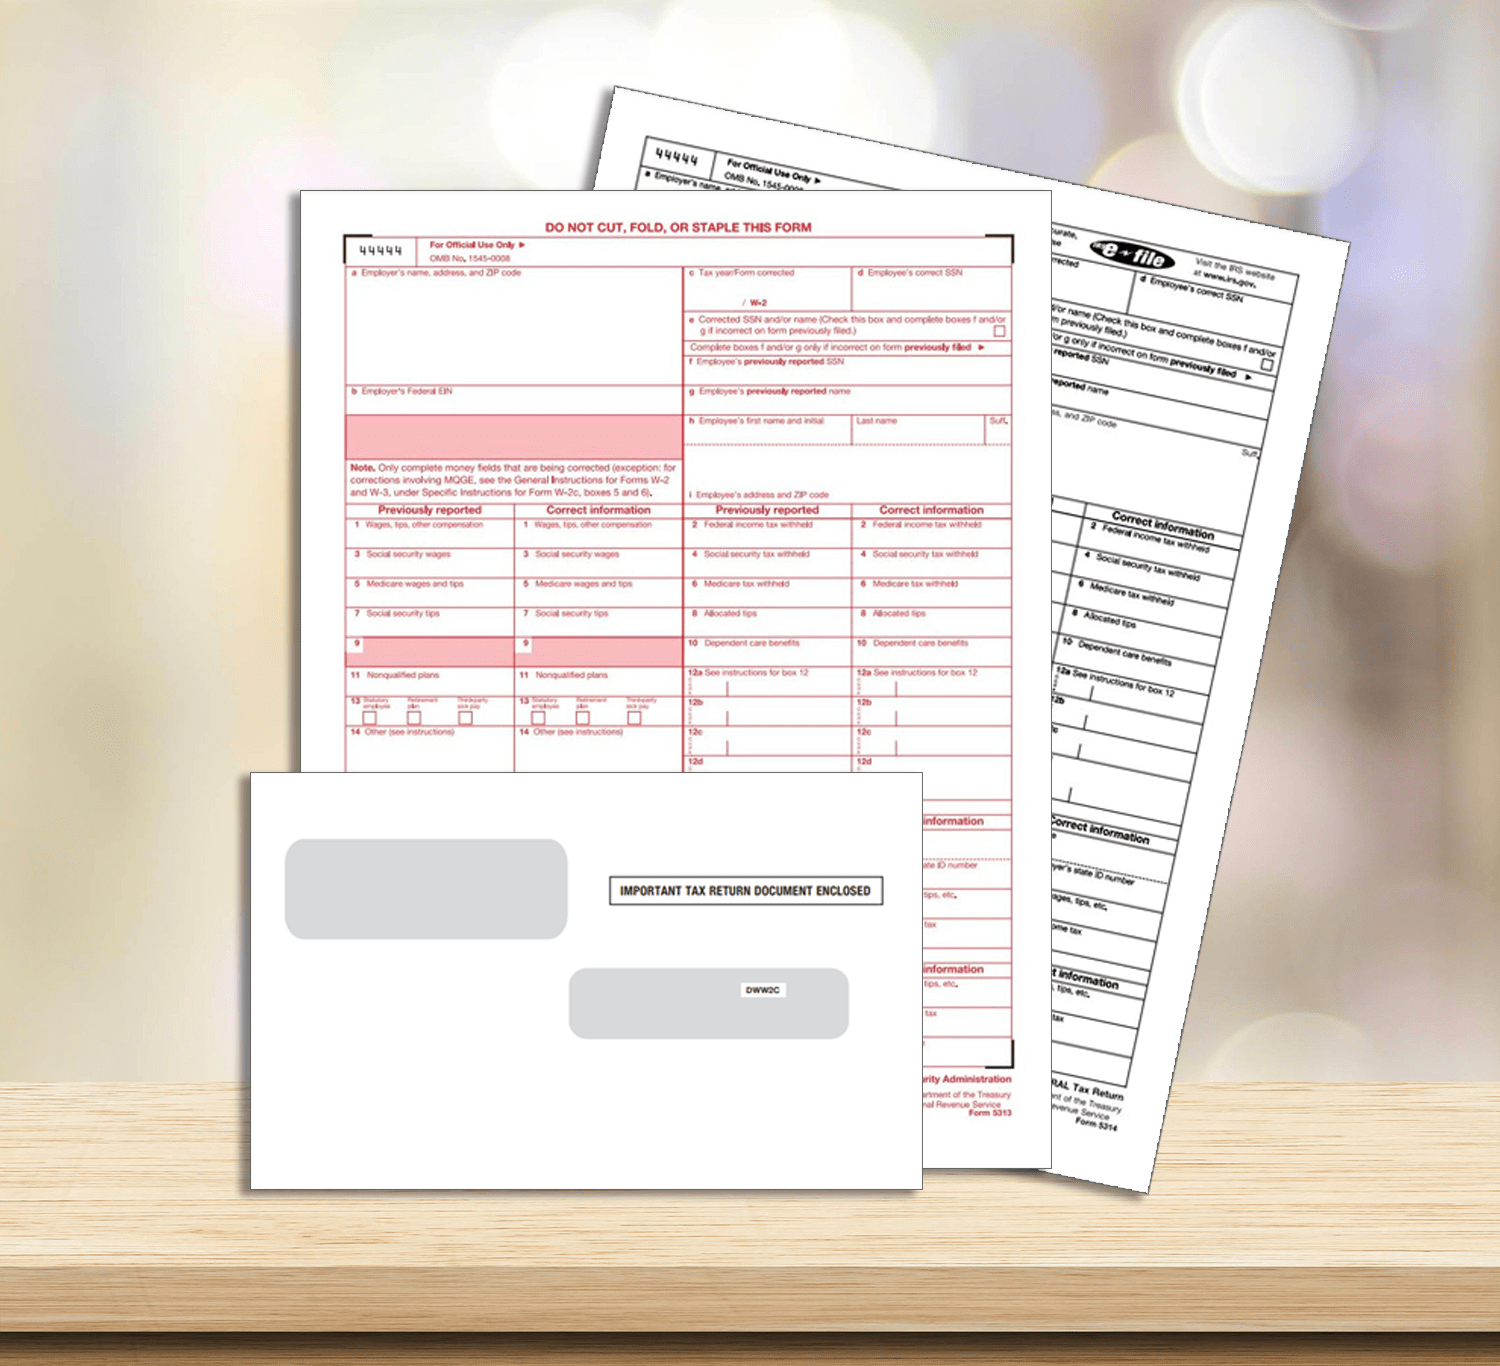 How to Correct W2 Forms using W2C Tax Forms or Online Filing - DiscountTaxForms.com